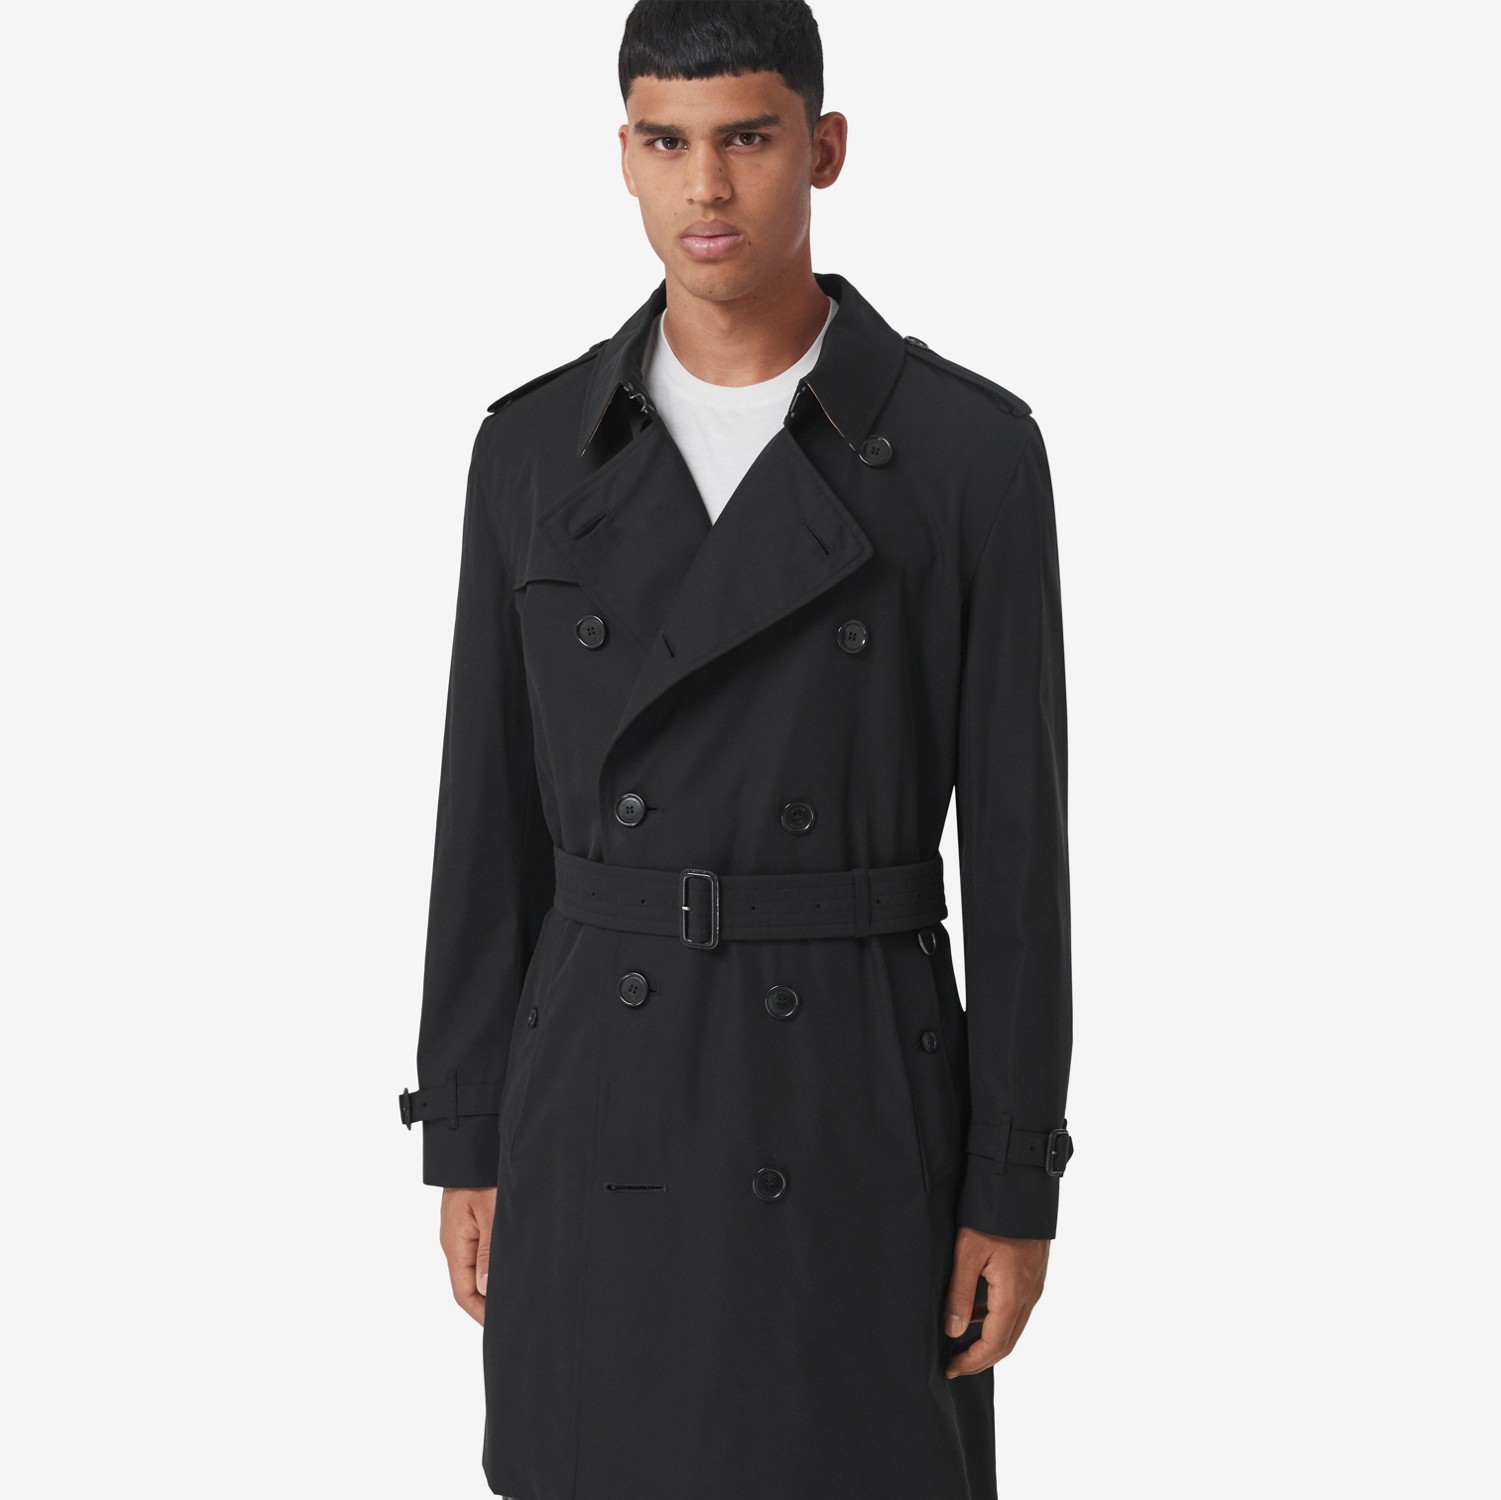 The Mid-length Kensington Heritage Trench Coat